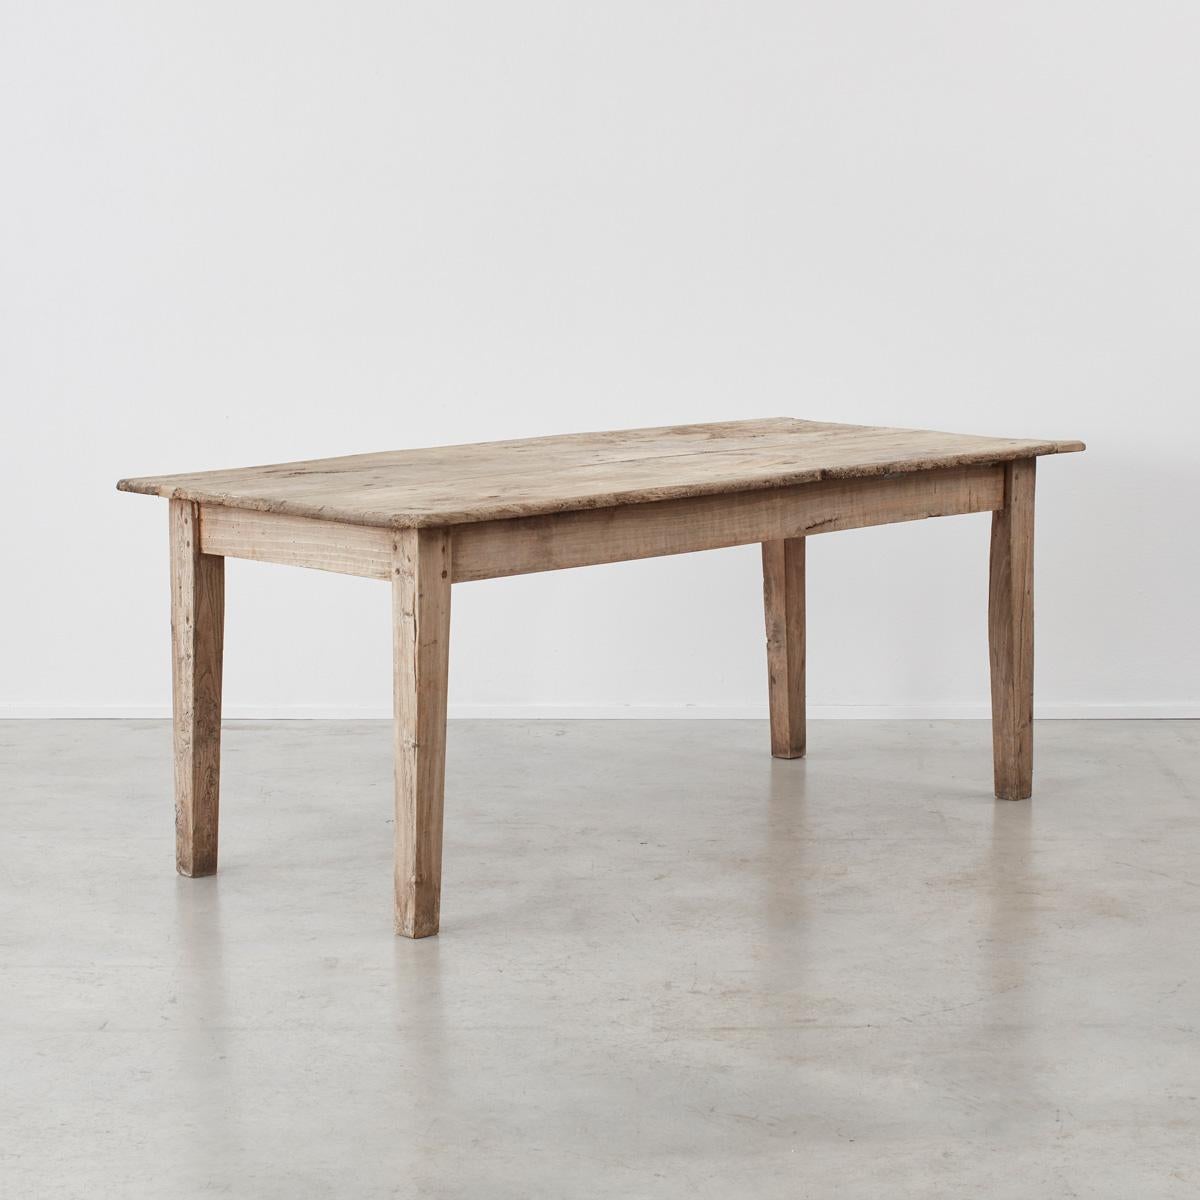 This sun-bleached, open-grained dining table will easily sit six guests - or at a squeeze, eight. It has a heavily patinated and bleached out walnut top on elm legs. It would be equally at home in a country cottage, sunny villa or antique-strewn